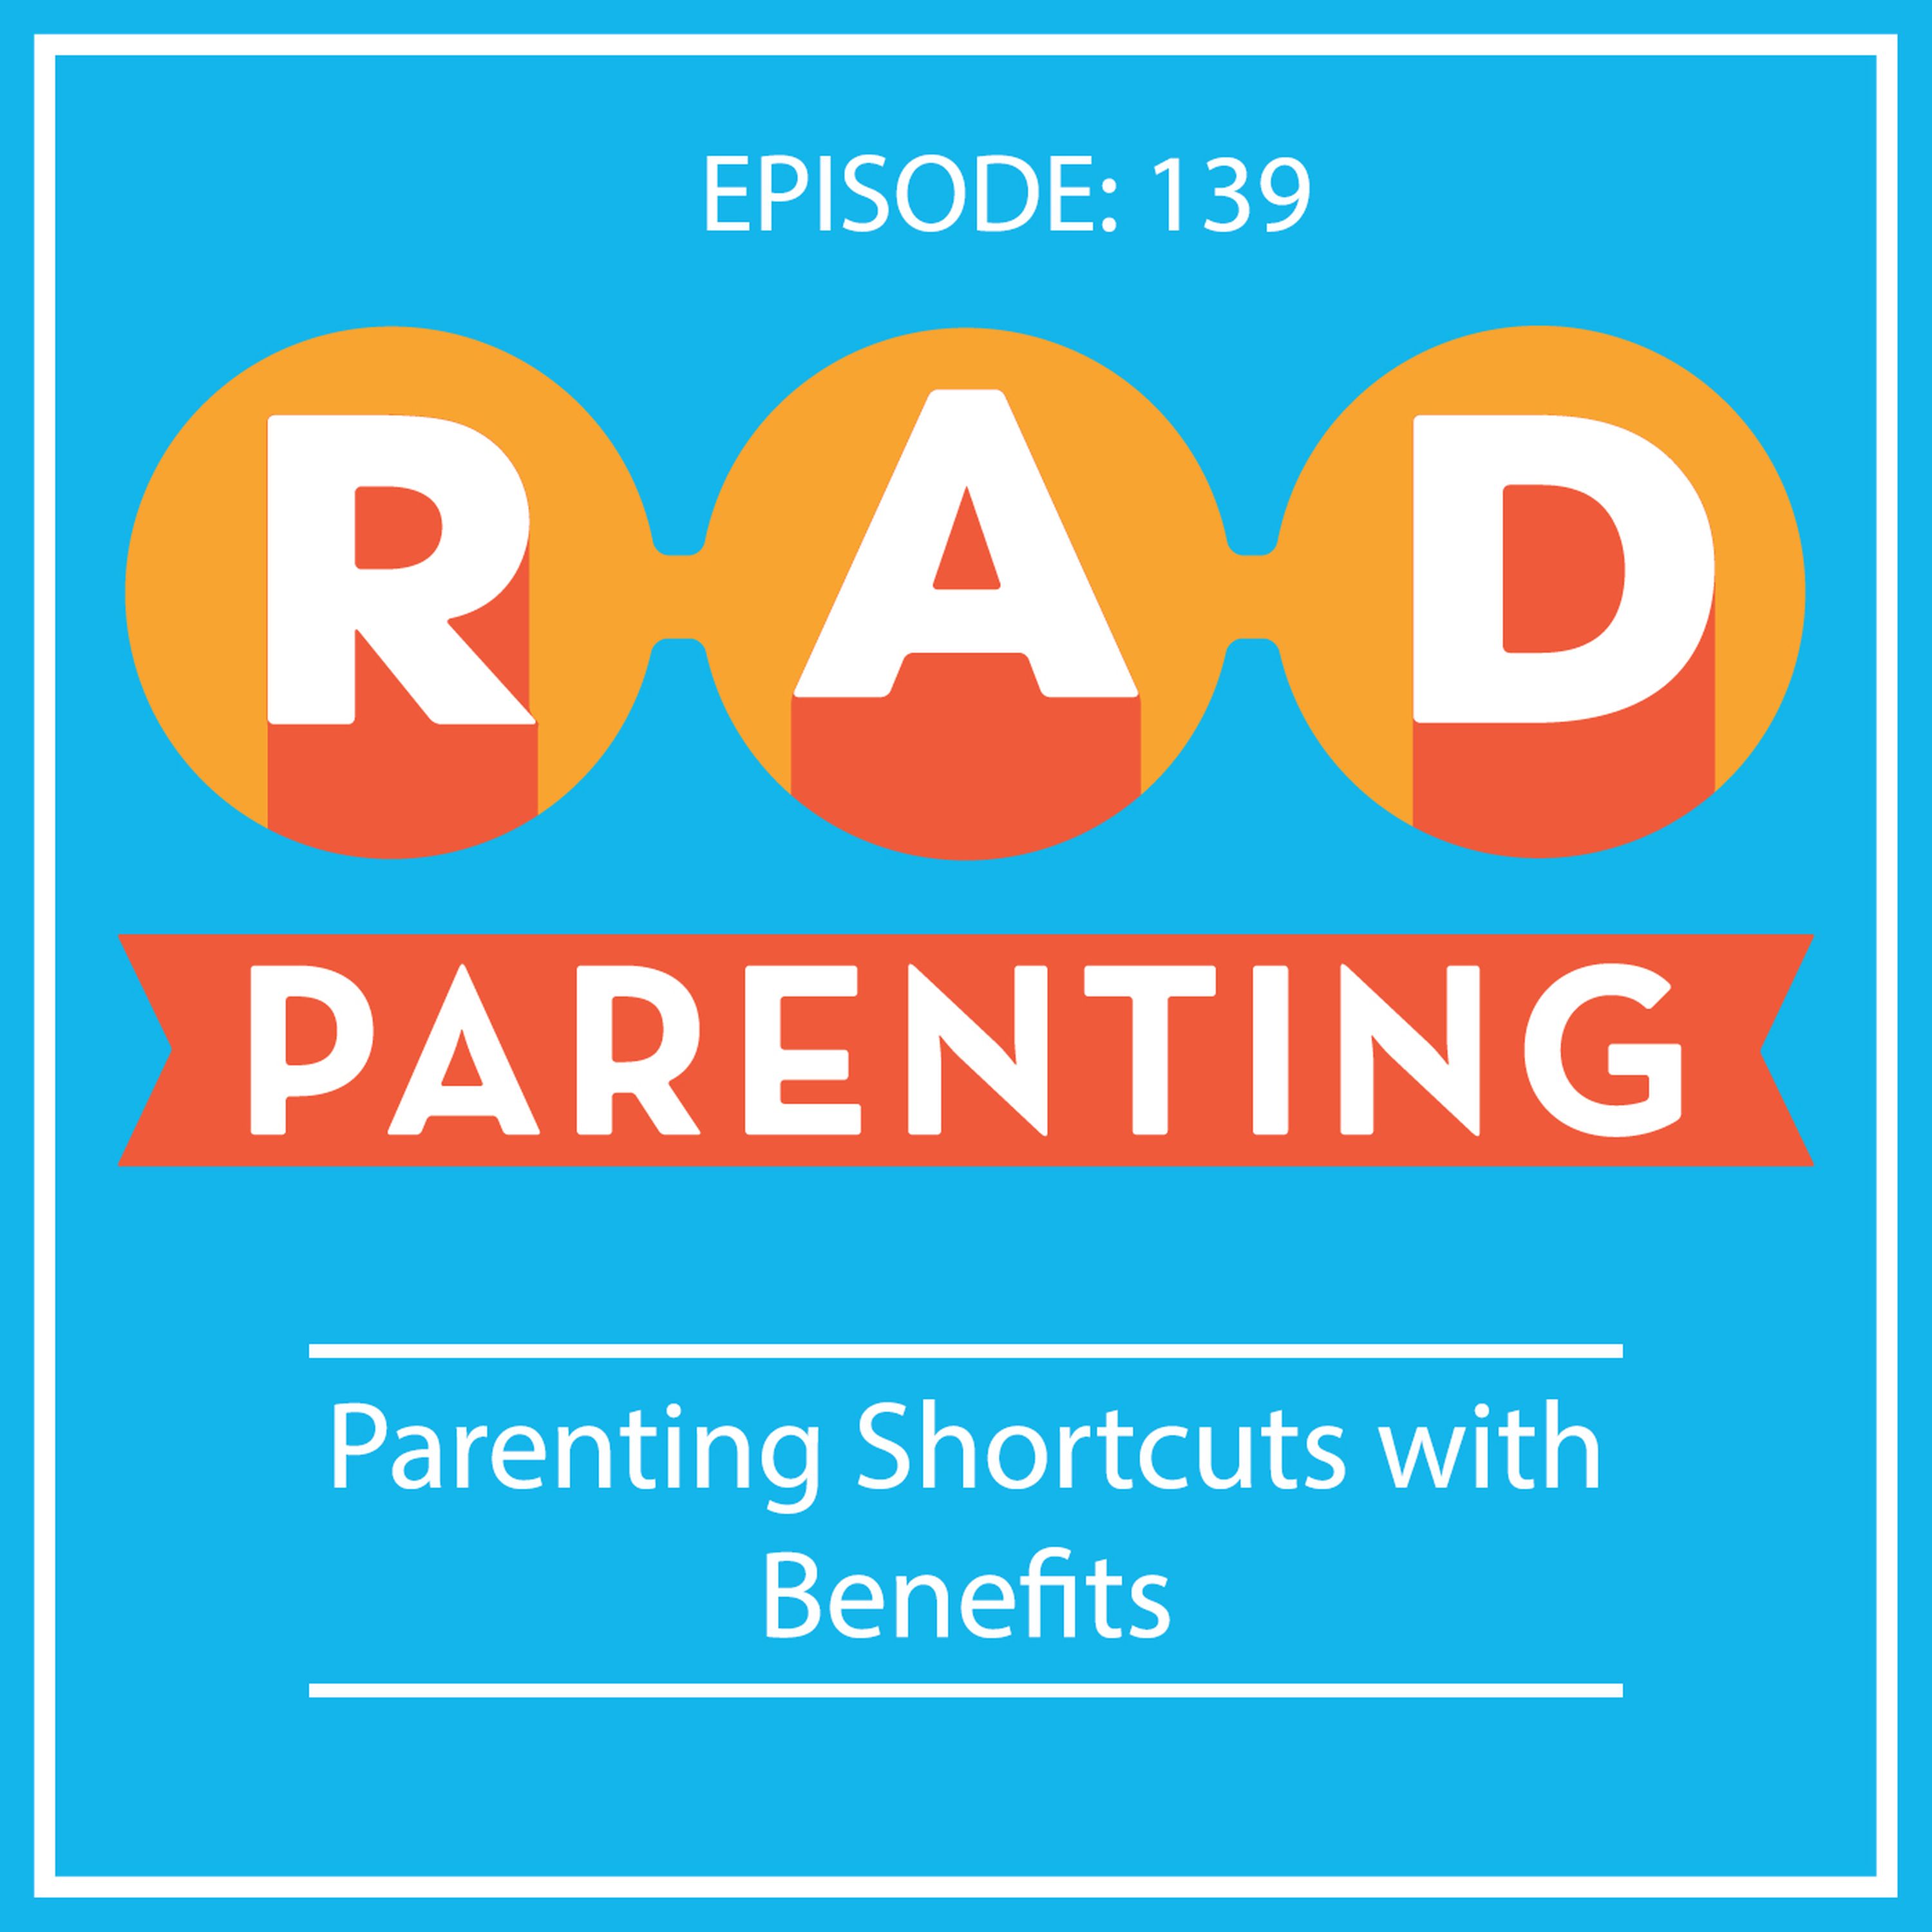 Parenting Shortcuts with Benefits